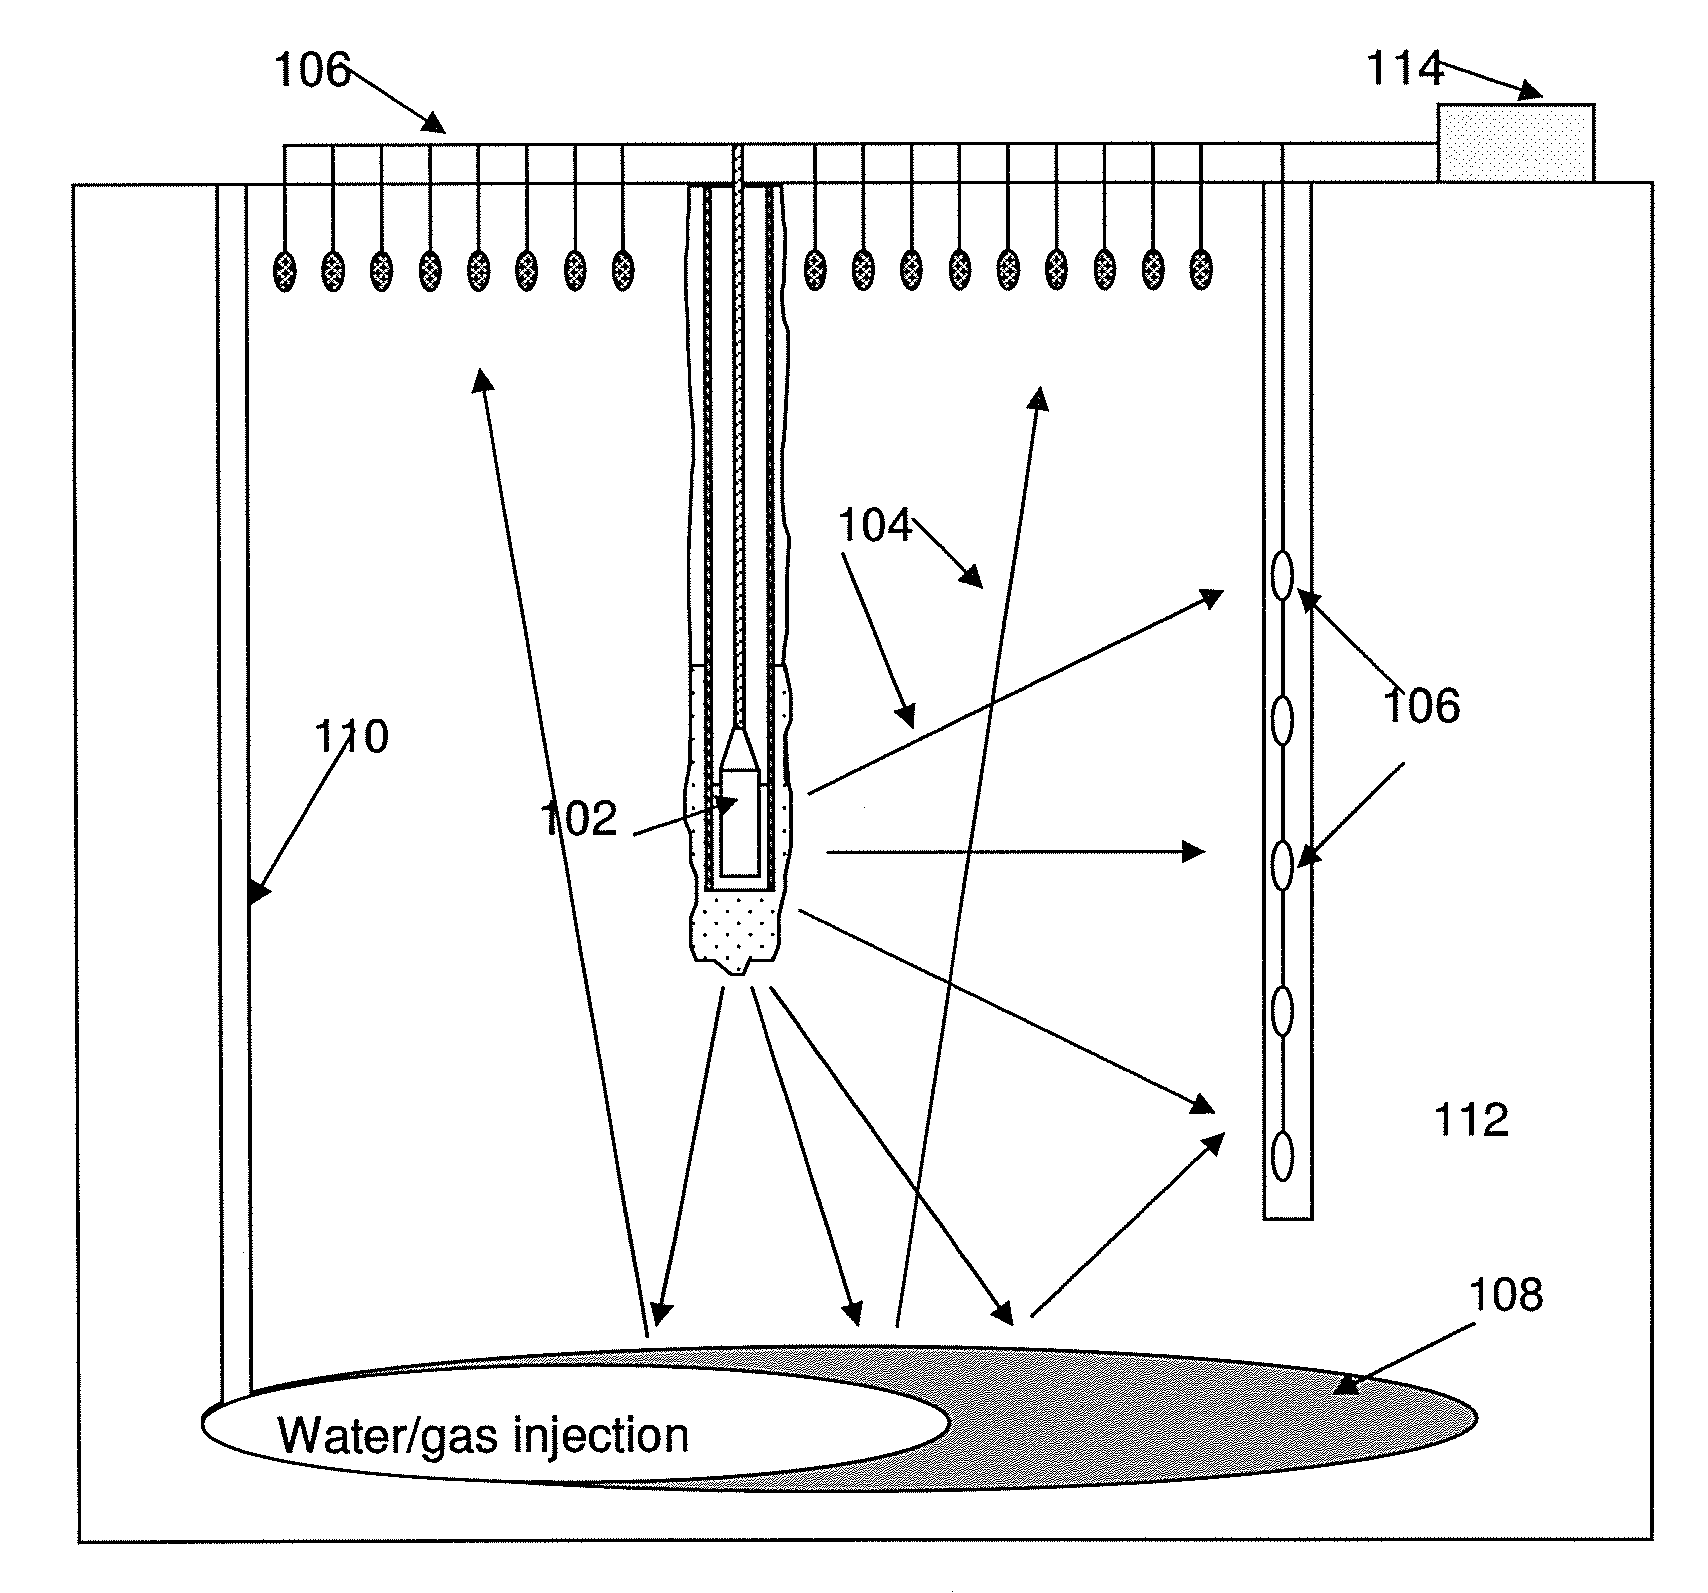 Methods and systems for deploying seismic devices